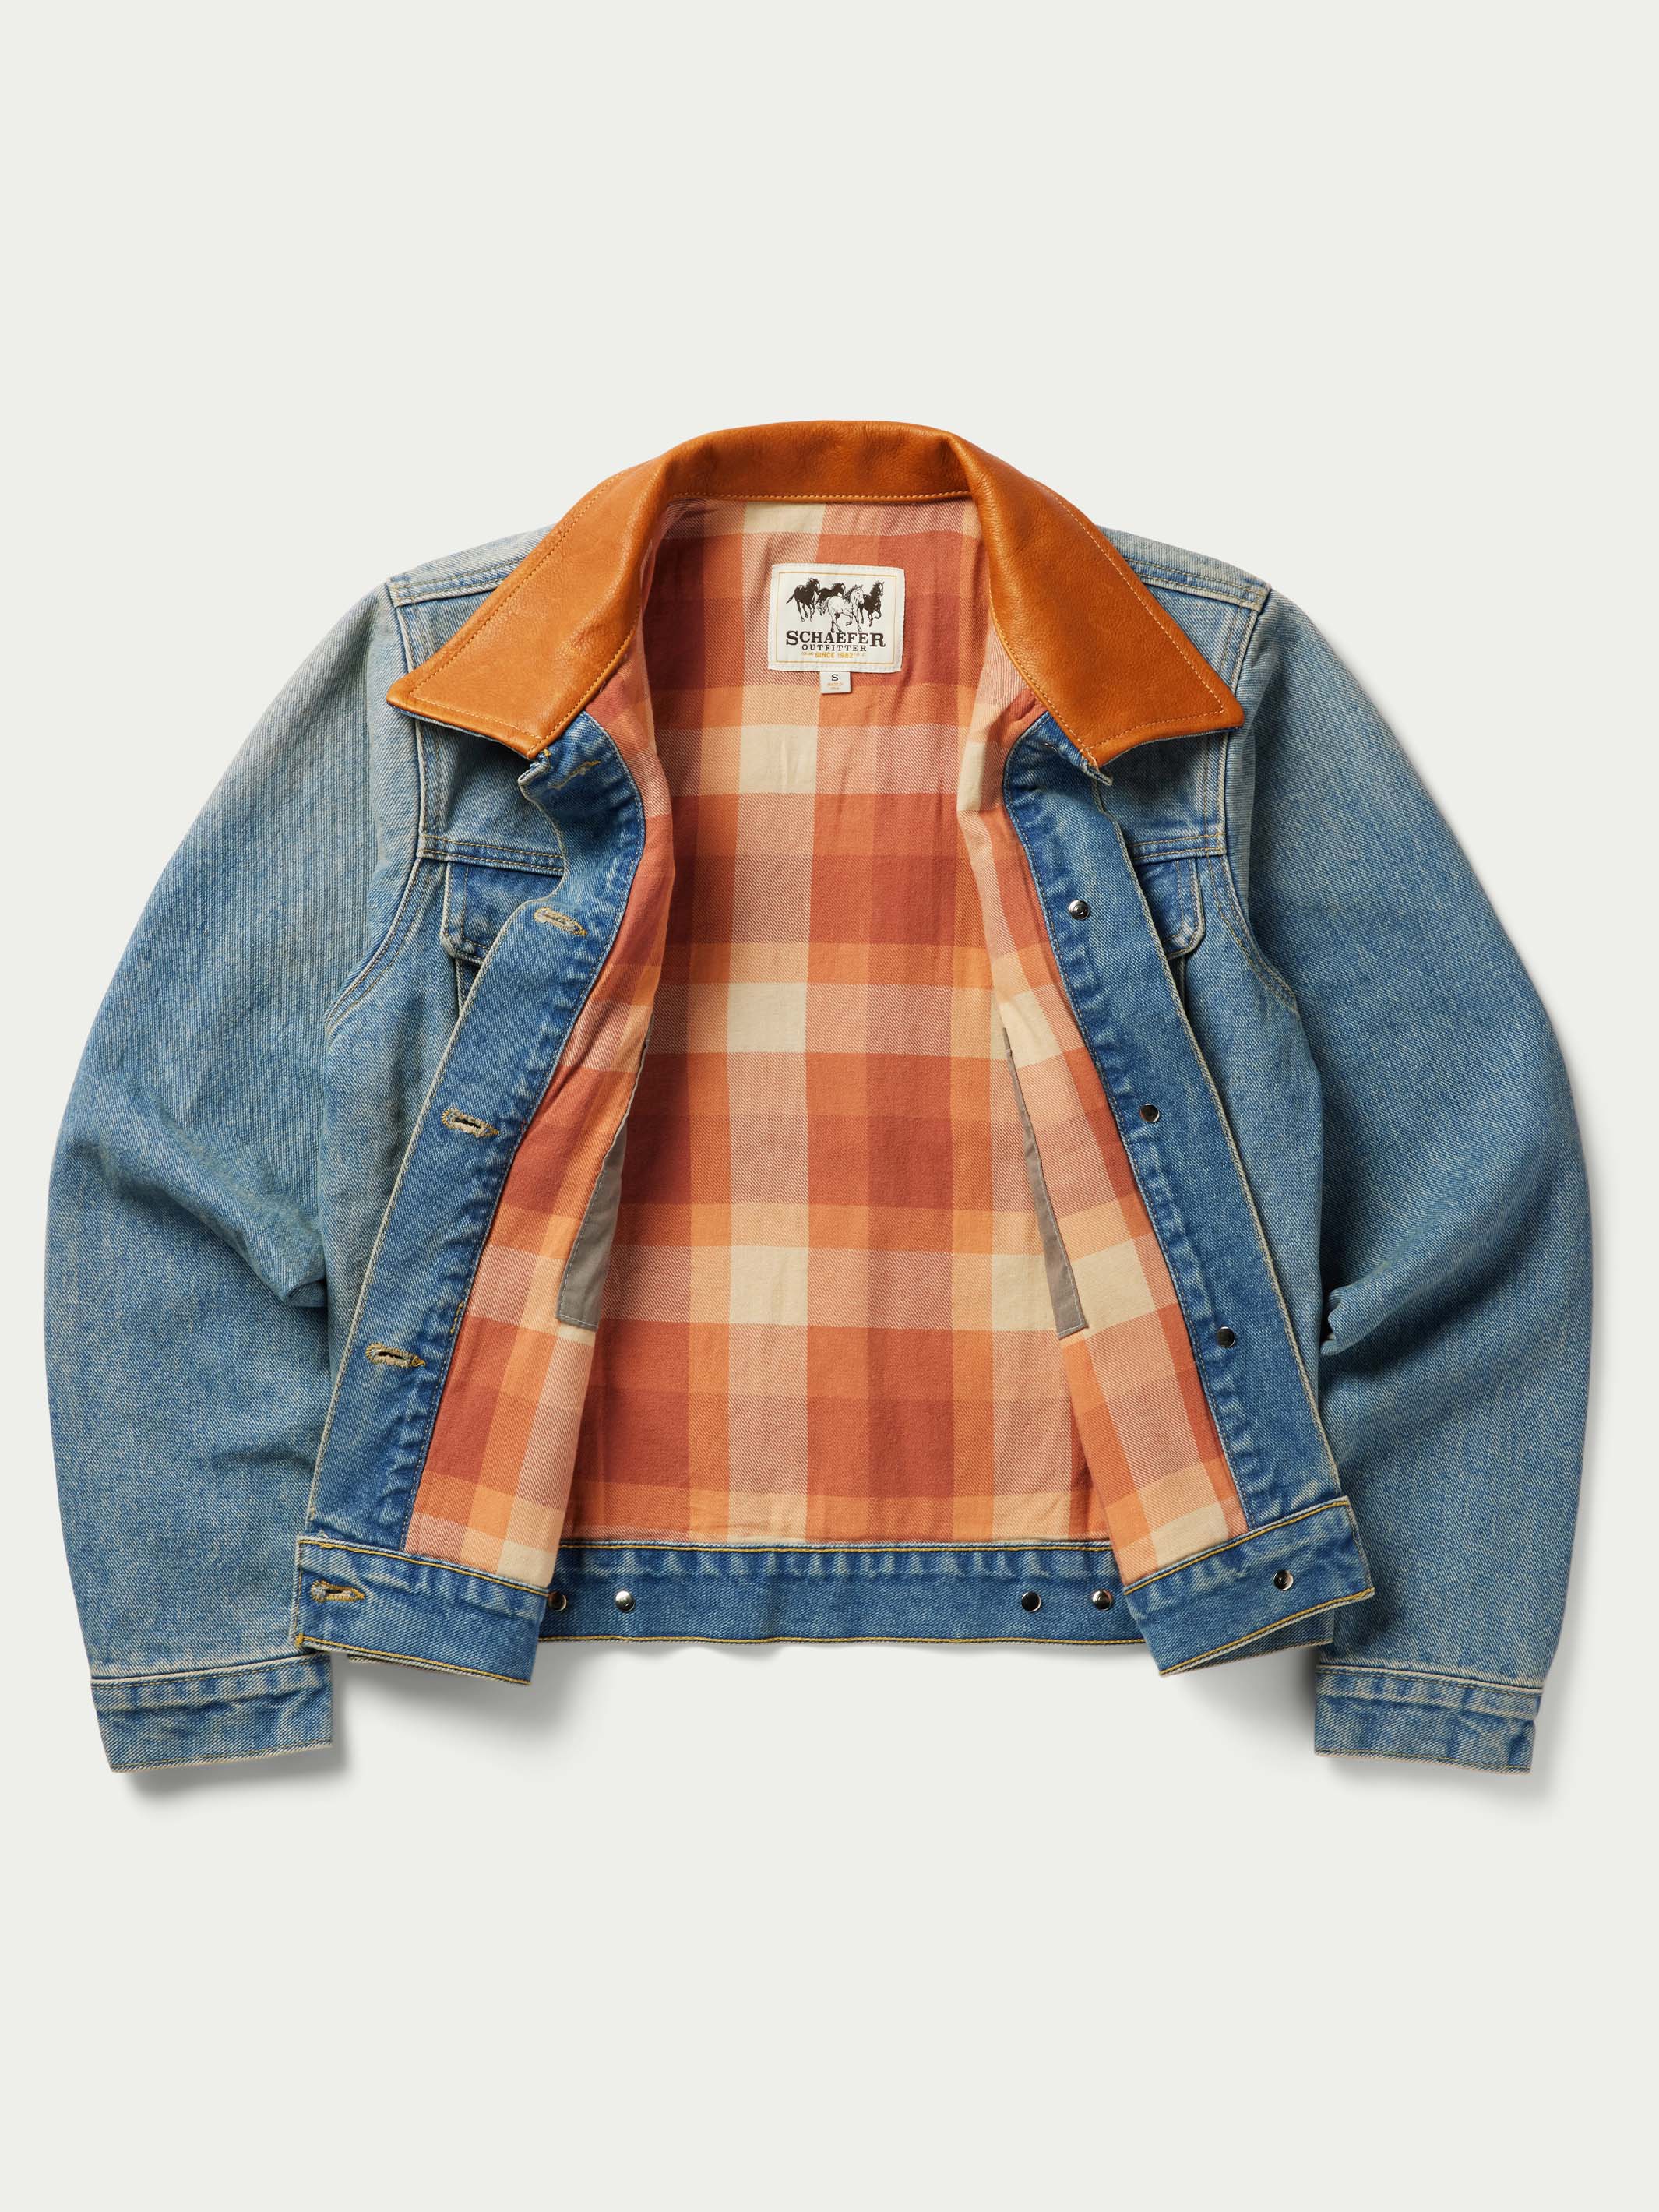 Plus Women's Denim and Plaid Jacket with contrasting Collar – Esme and  Elodie